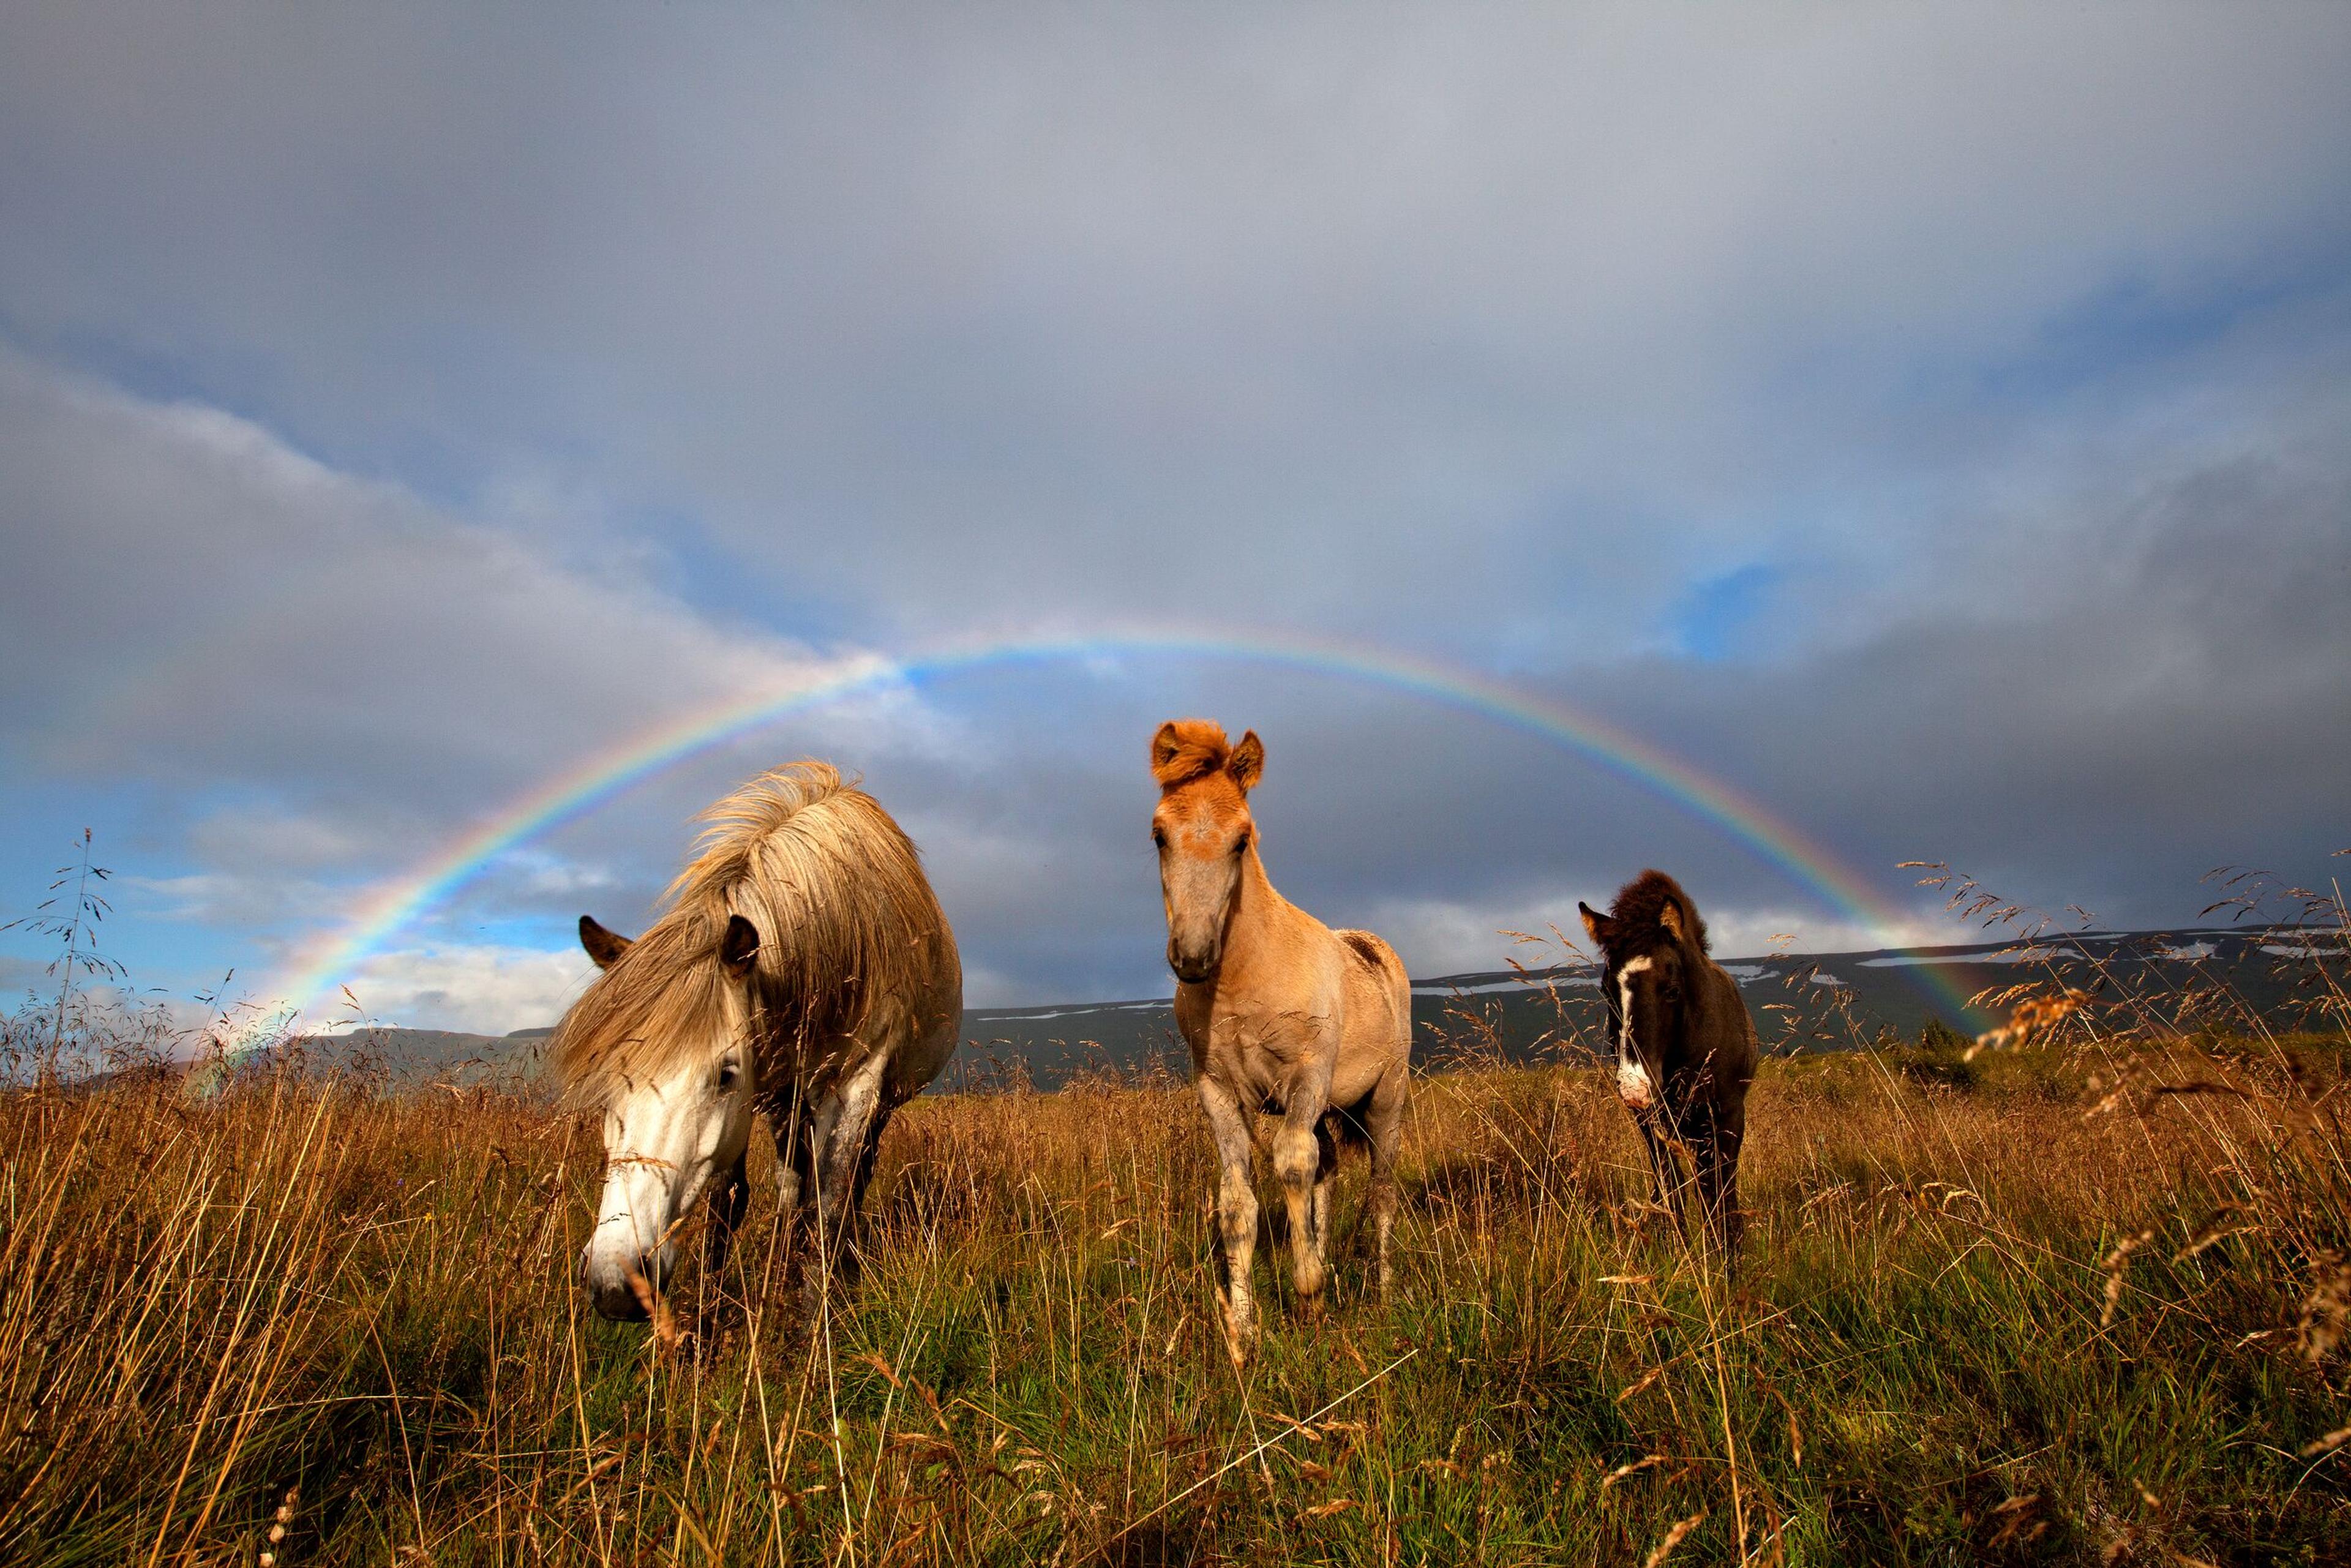 Three horses walking towards the camera with a vibrant rainbow arching gracefully above them